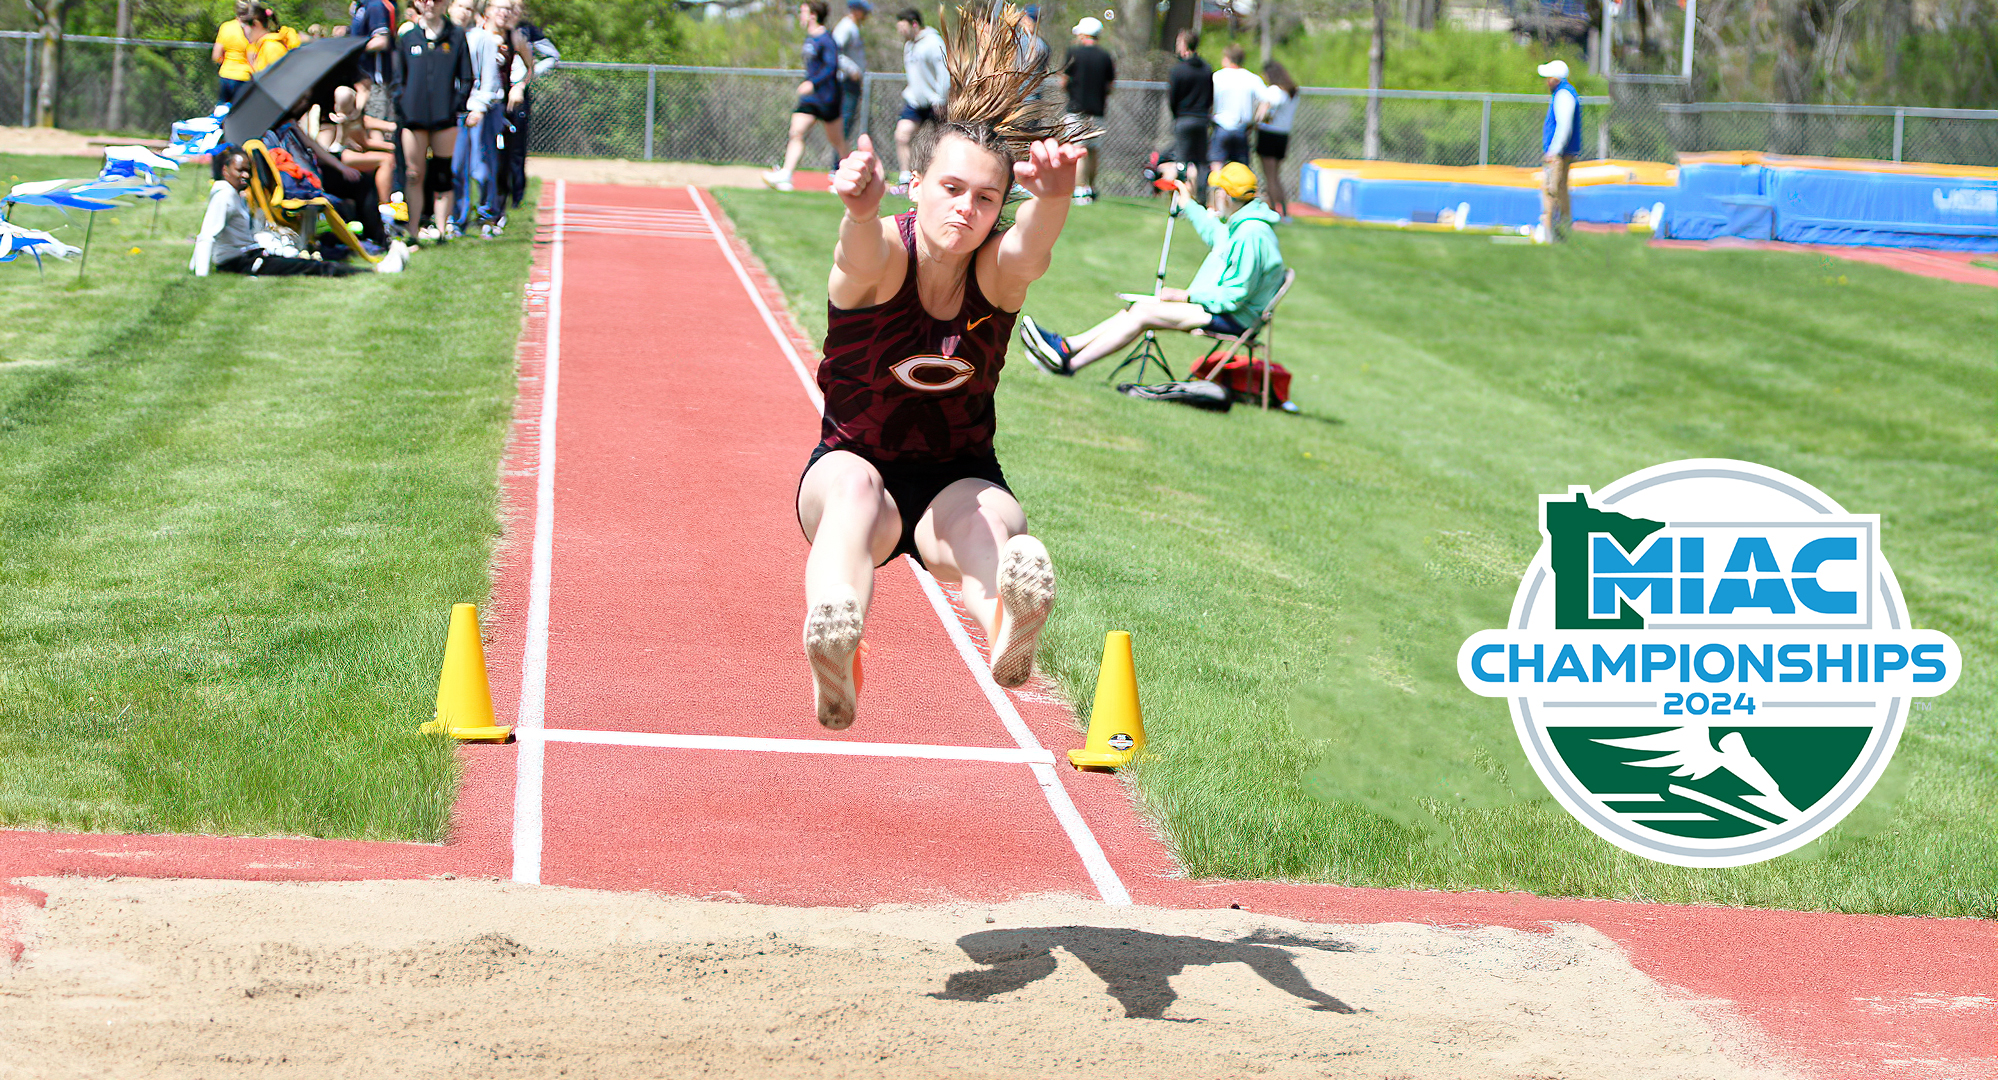 Jenna Kalevik competes in the long jump in the MIAC Heptathlon. She finished fourth with a PR point total. (Photo courtesy of David Pape)